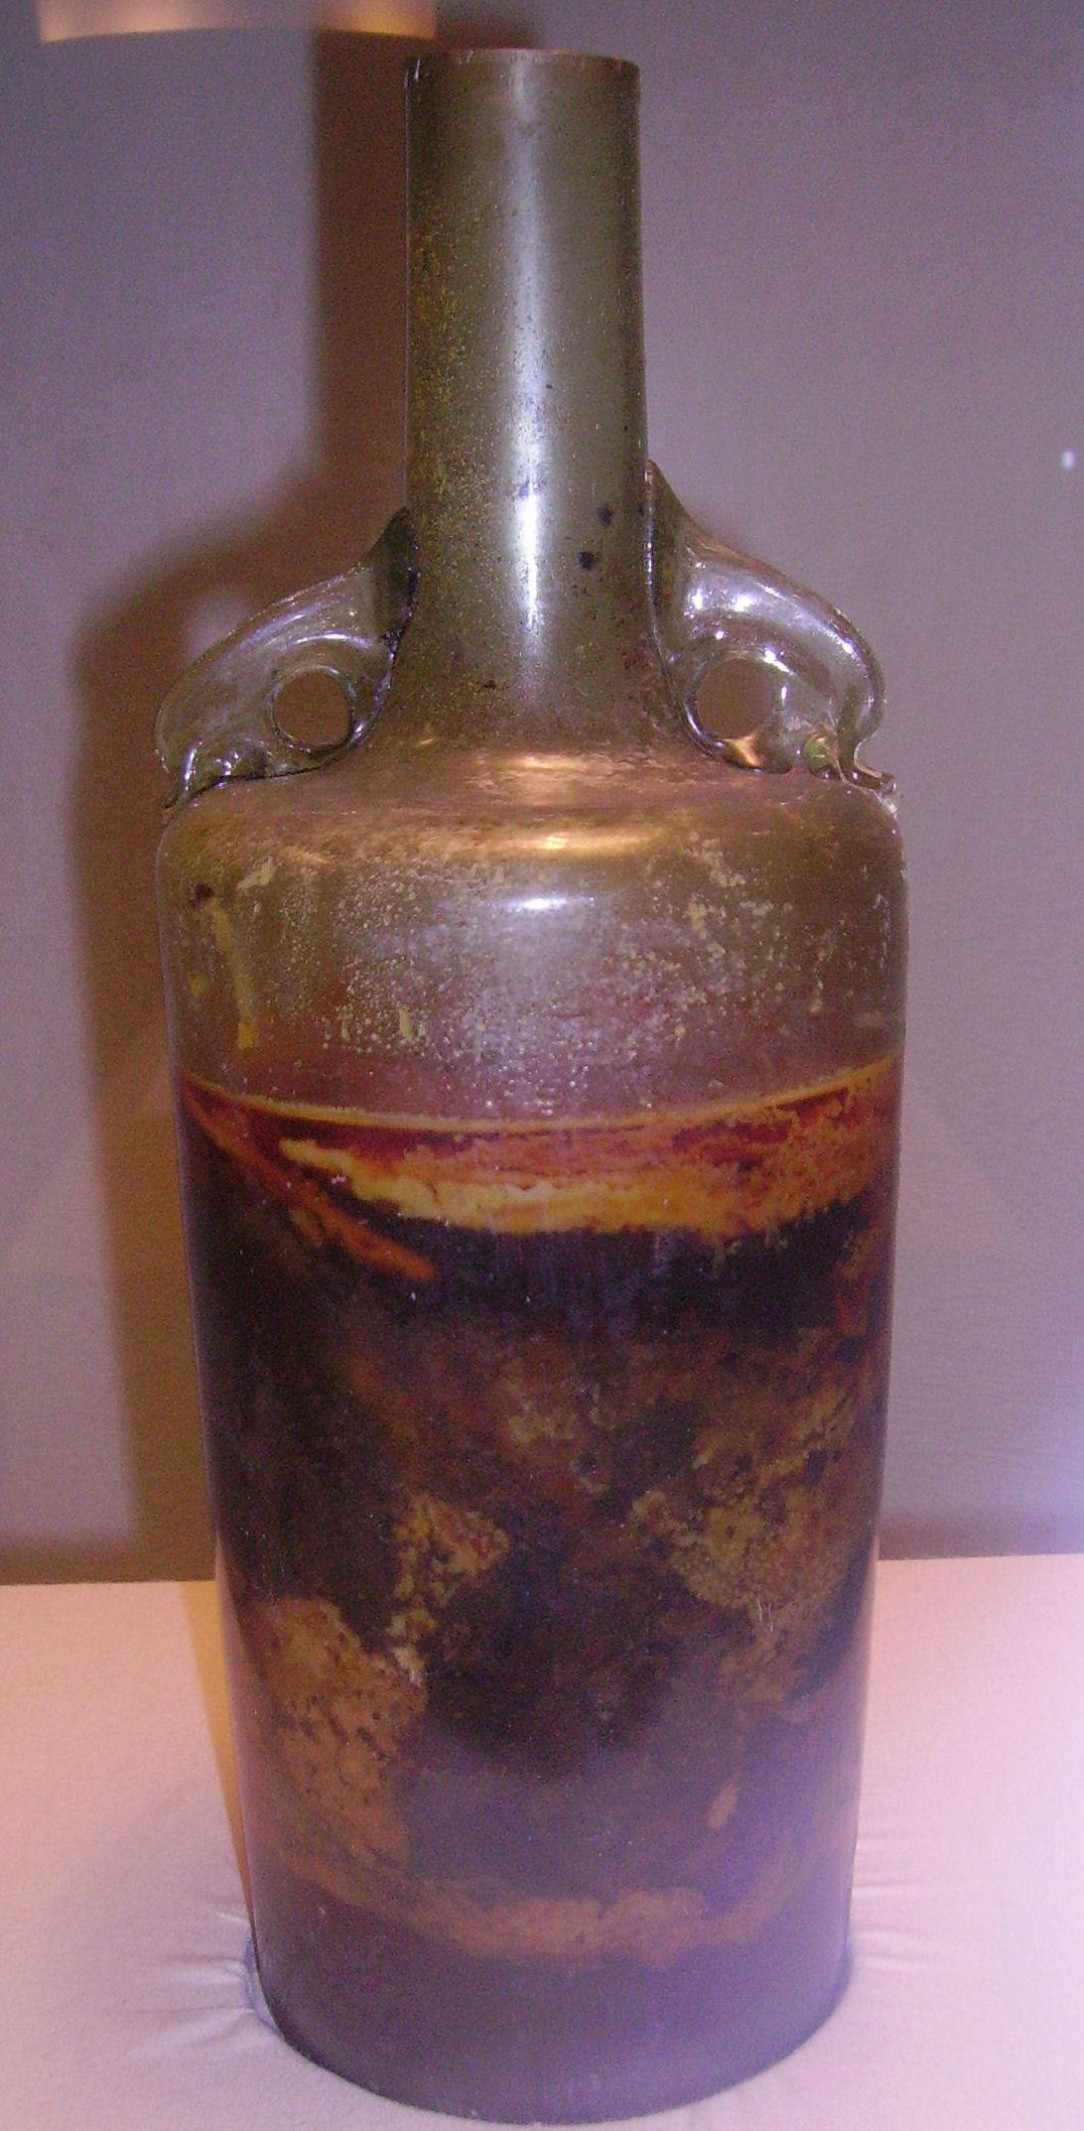 The Speyer wine bottle is the oldest known bottle of wine which has been dated between 325 and 350 AD